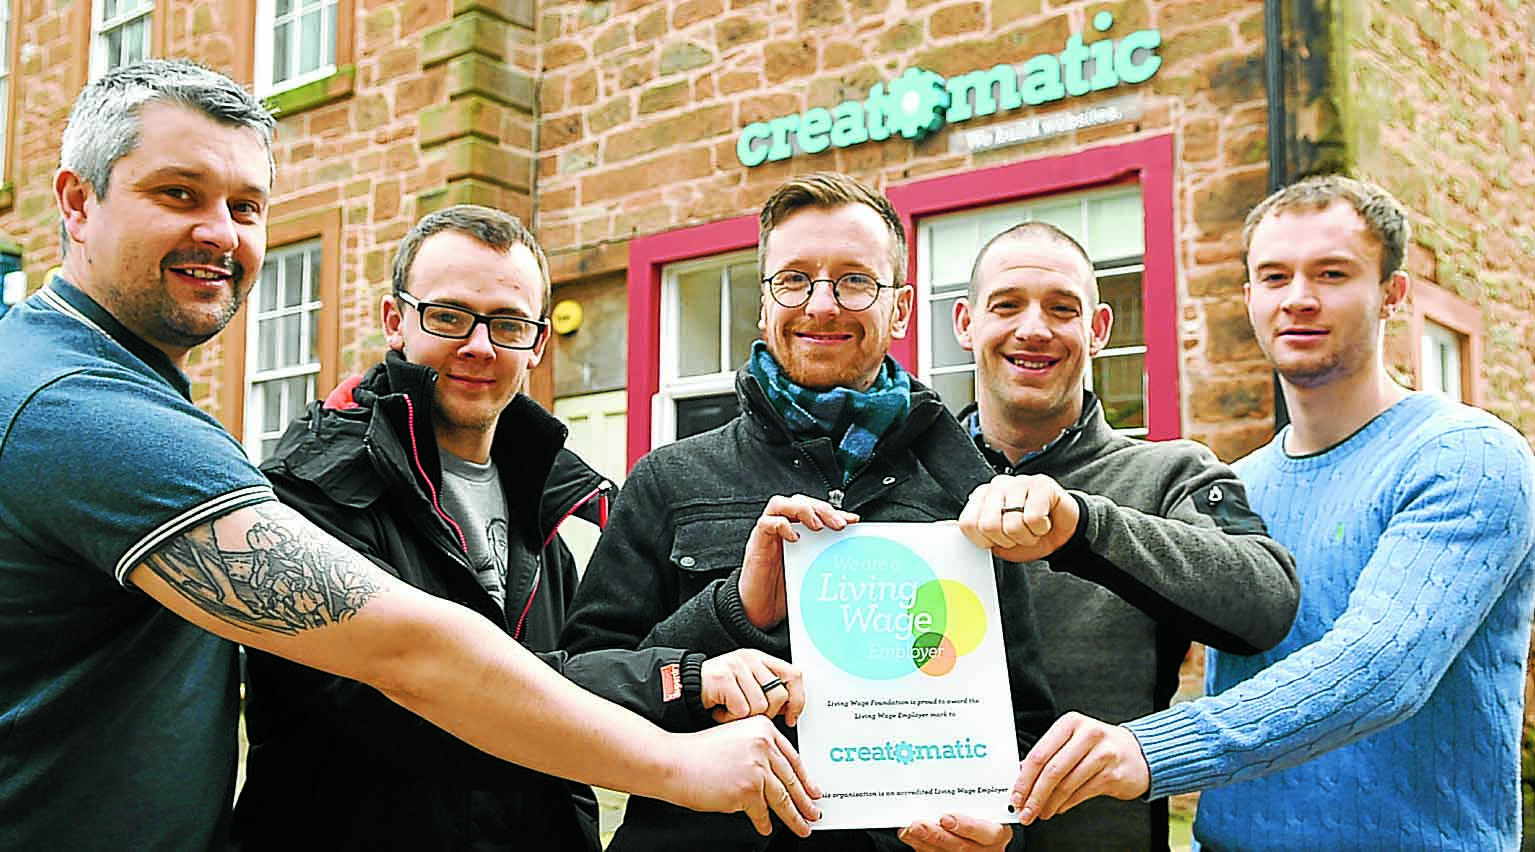 Web design firm leads the way with Living Wage deal